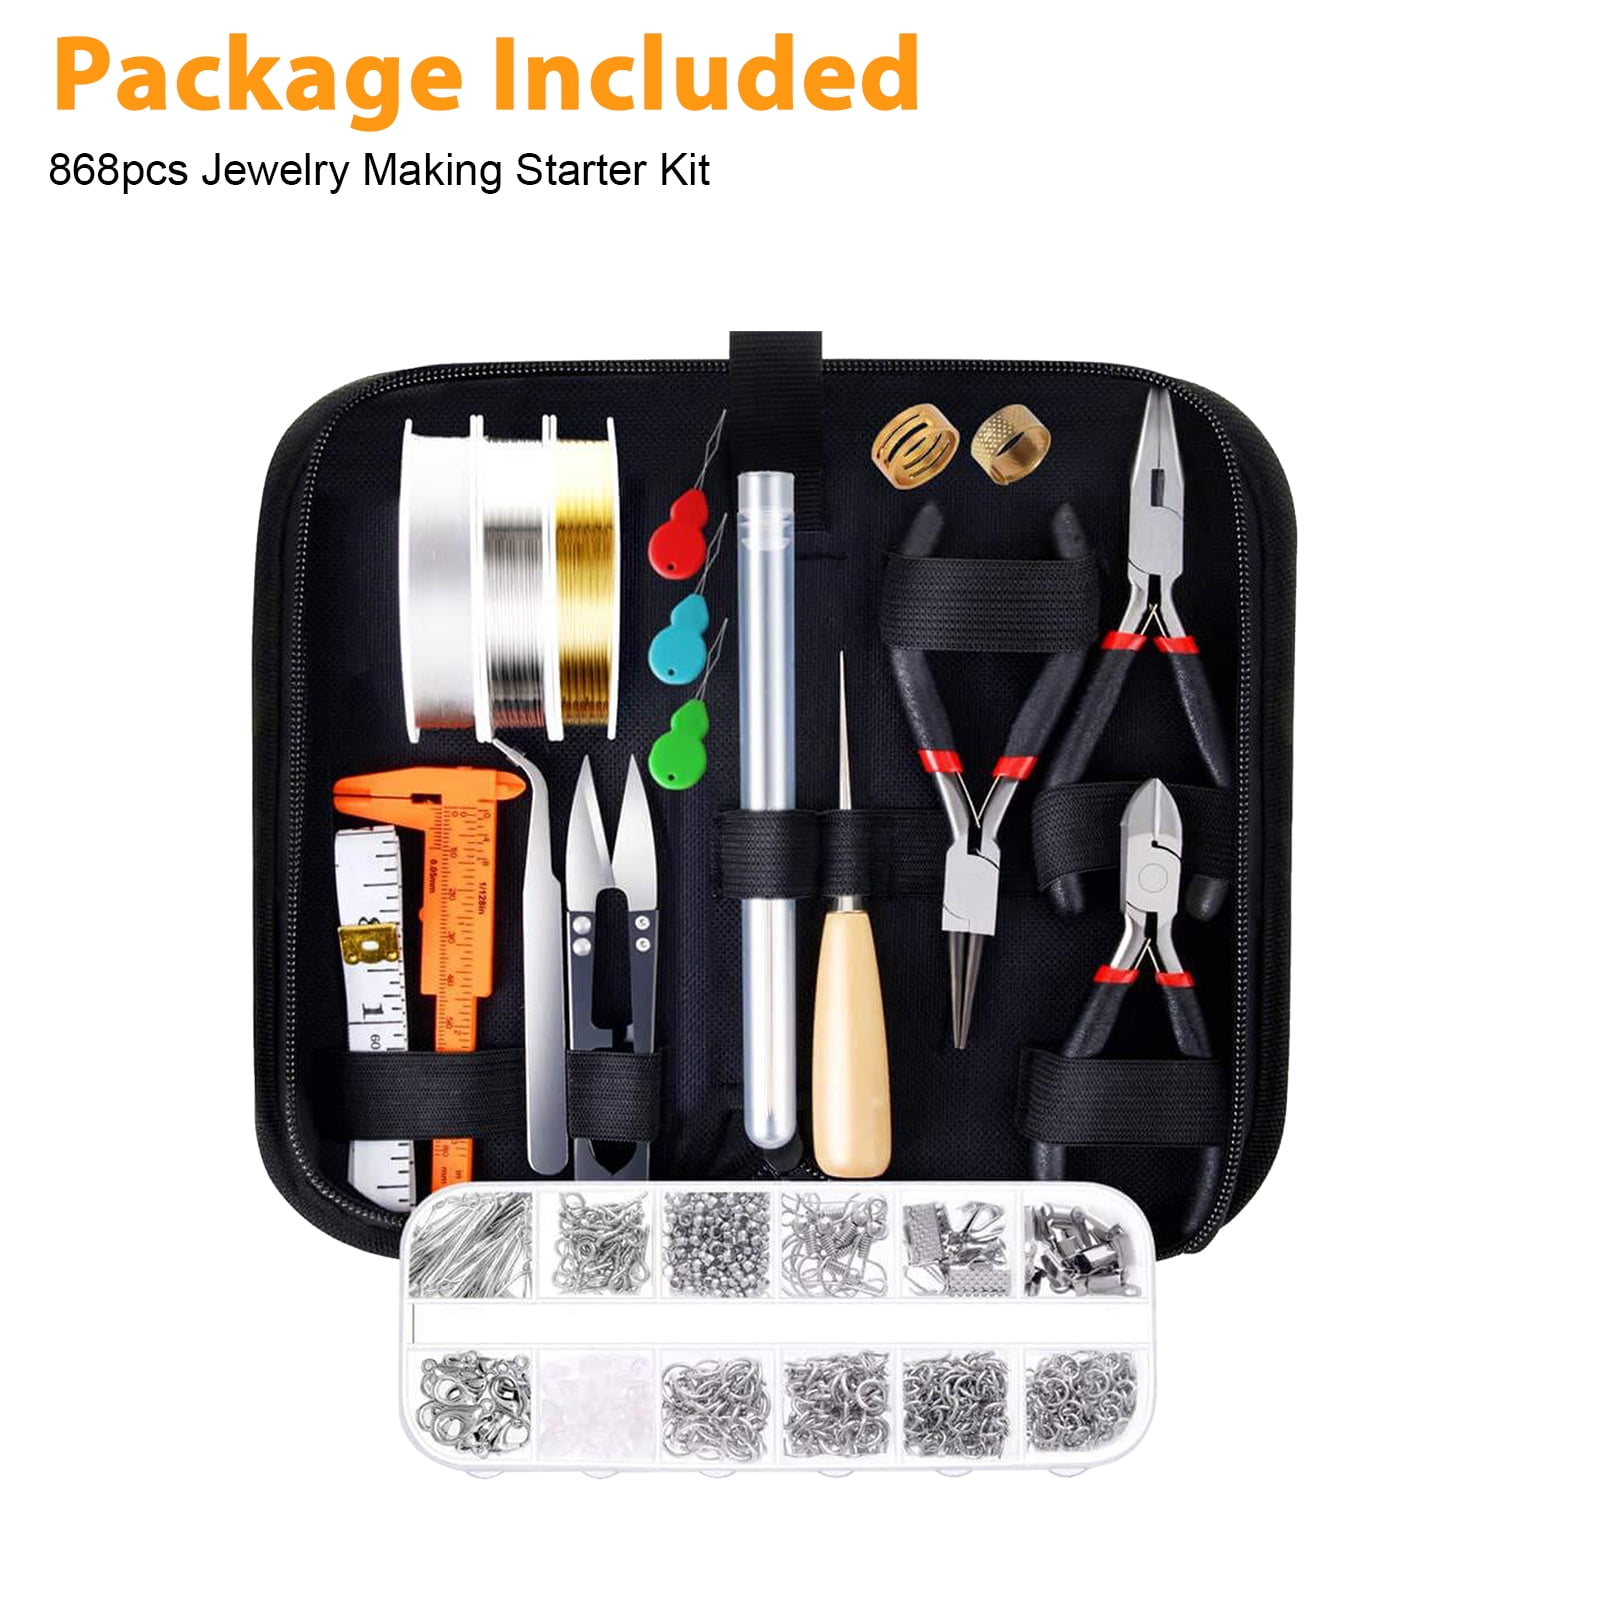 Volamor - Jewellery Making Kit for Adults with Jewellery Tools